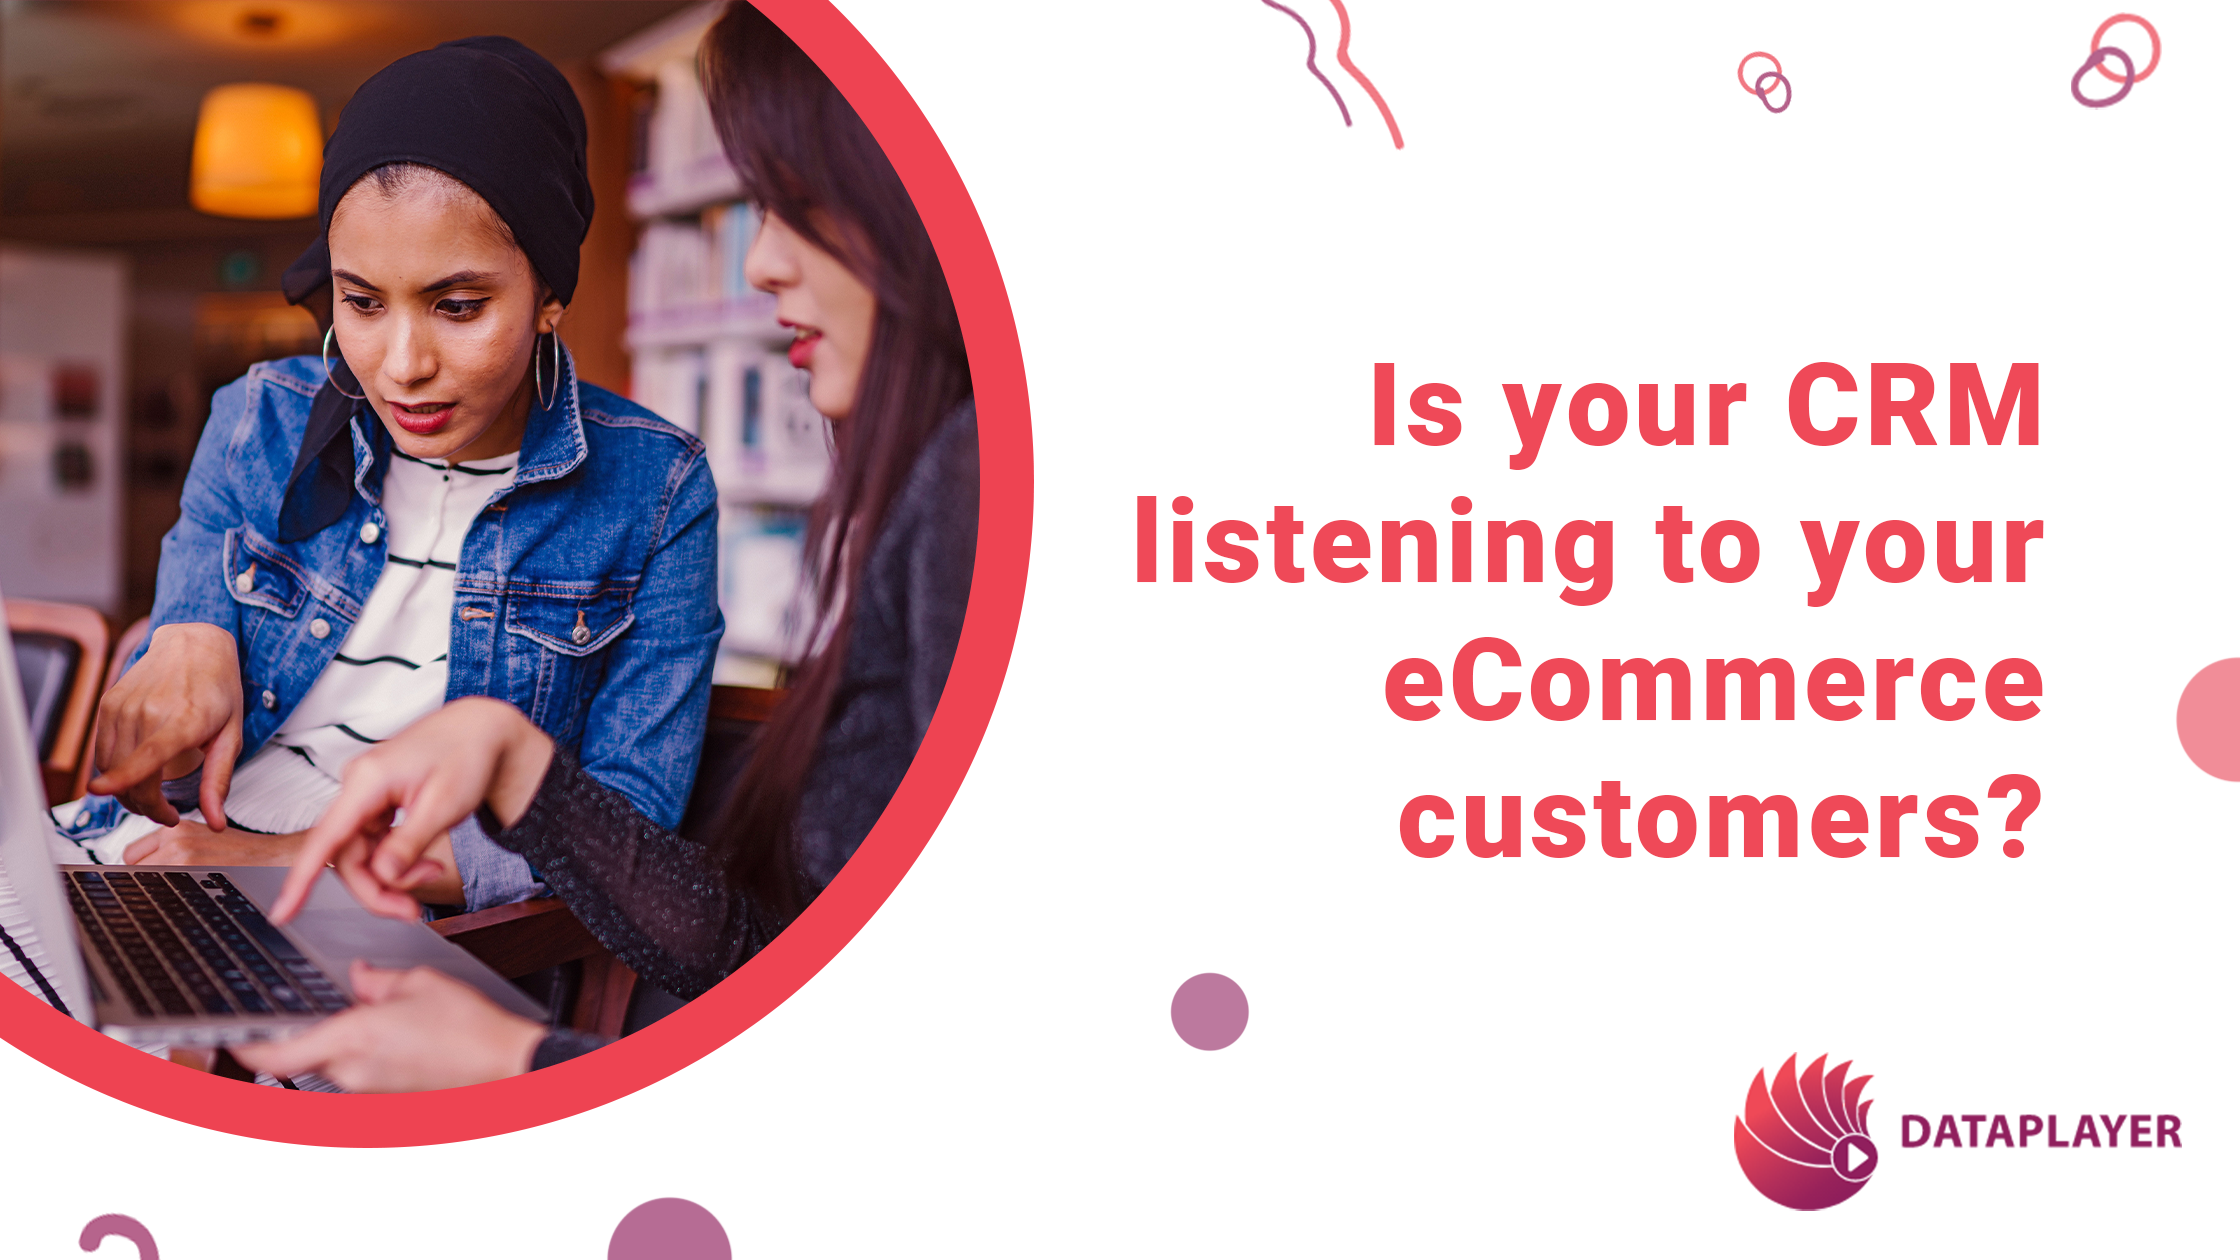 Psssst – is your CRM listening to your eCommerce customers?